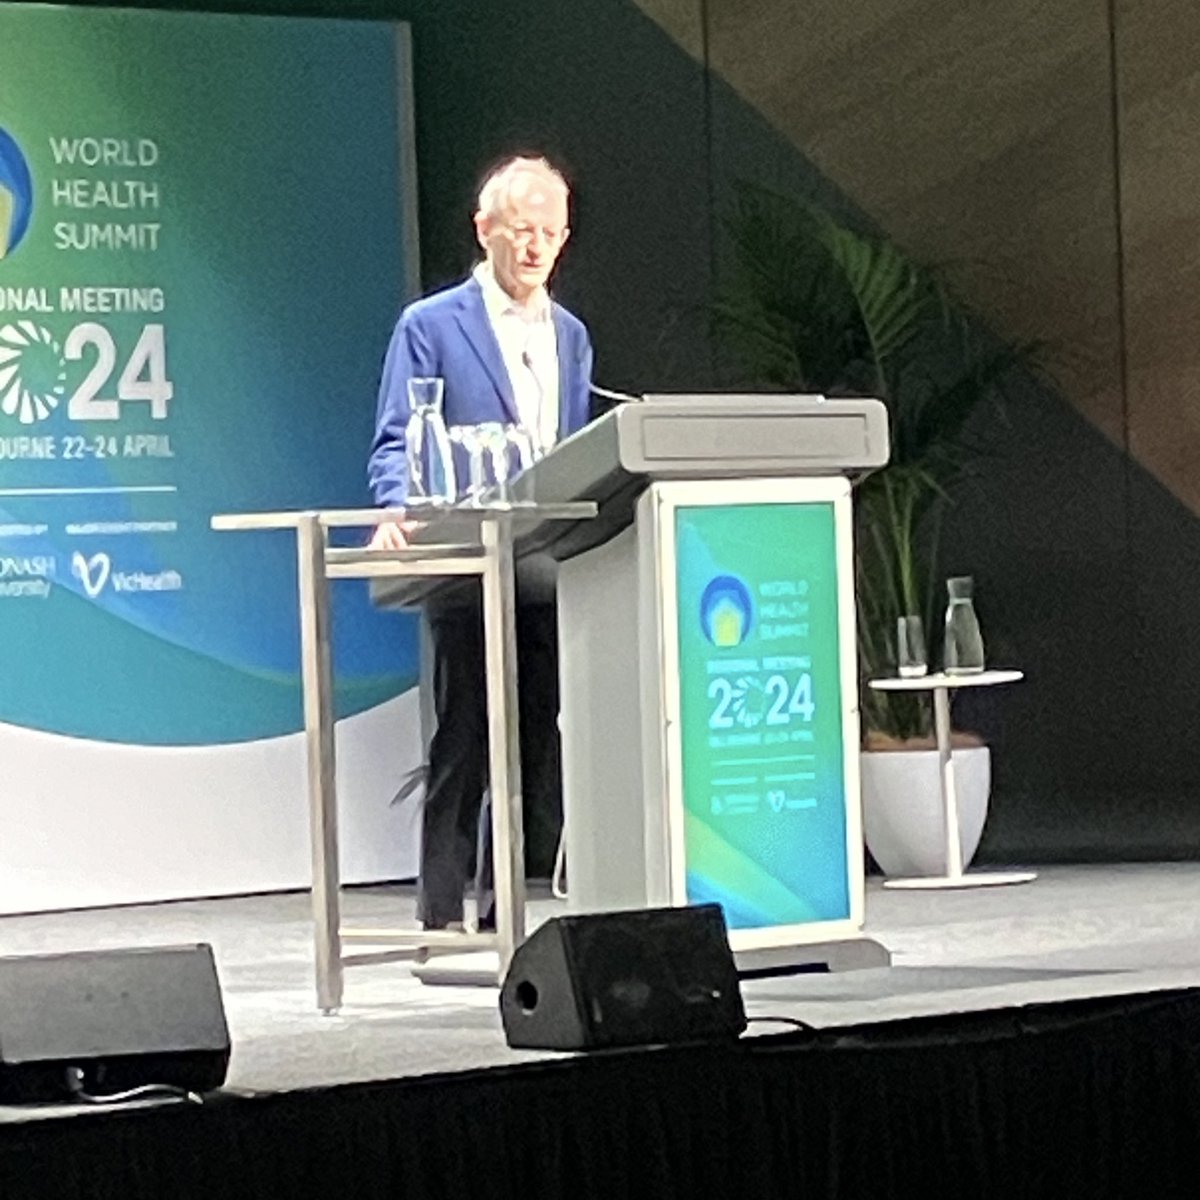 “We’ve got the evidence of what you can do but we don’t have the lived experience.” @MichaelMarmot on the need to bring together the triangle that moves the mountain (Thai proverb): People Government Knowledge (academia) #WHSMelbourne2024